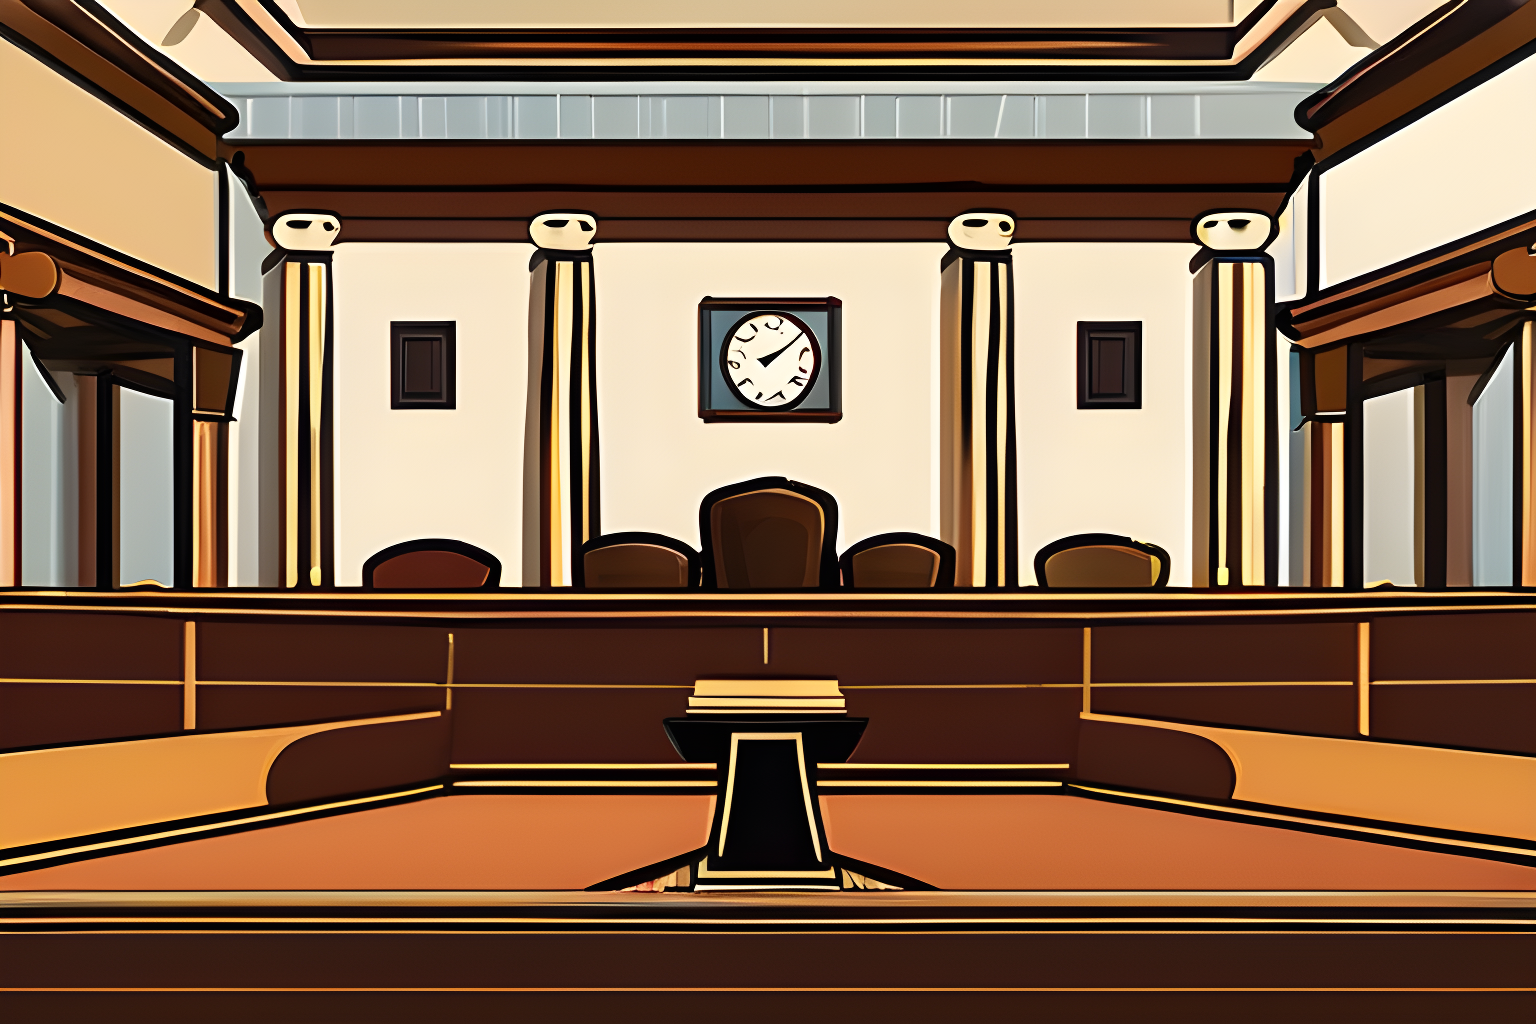 Illustrate a court room